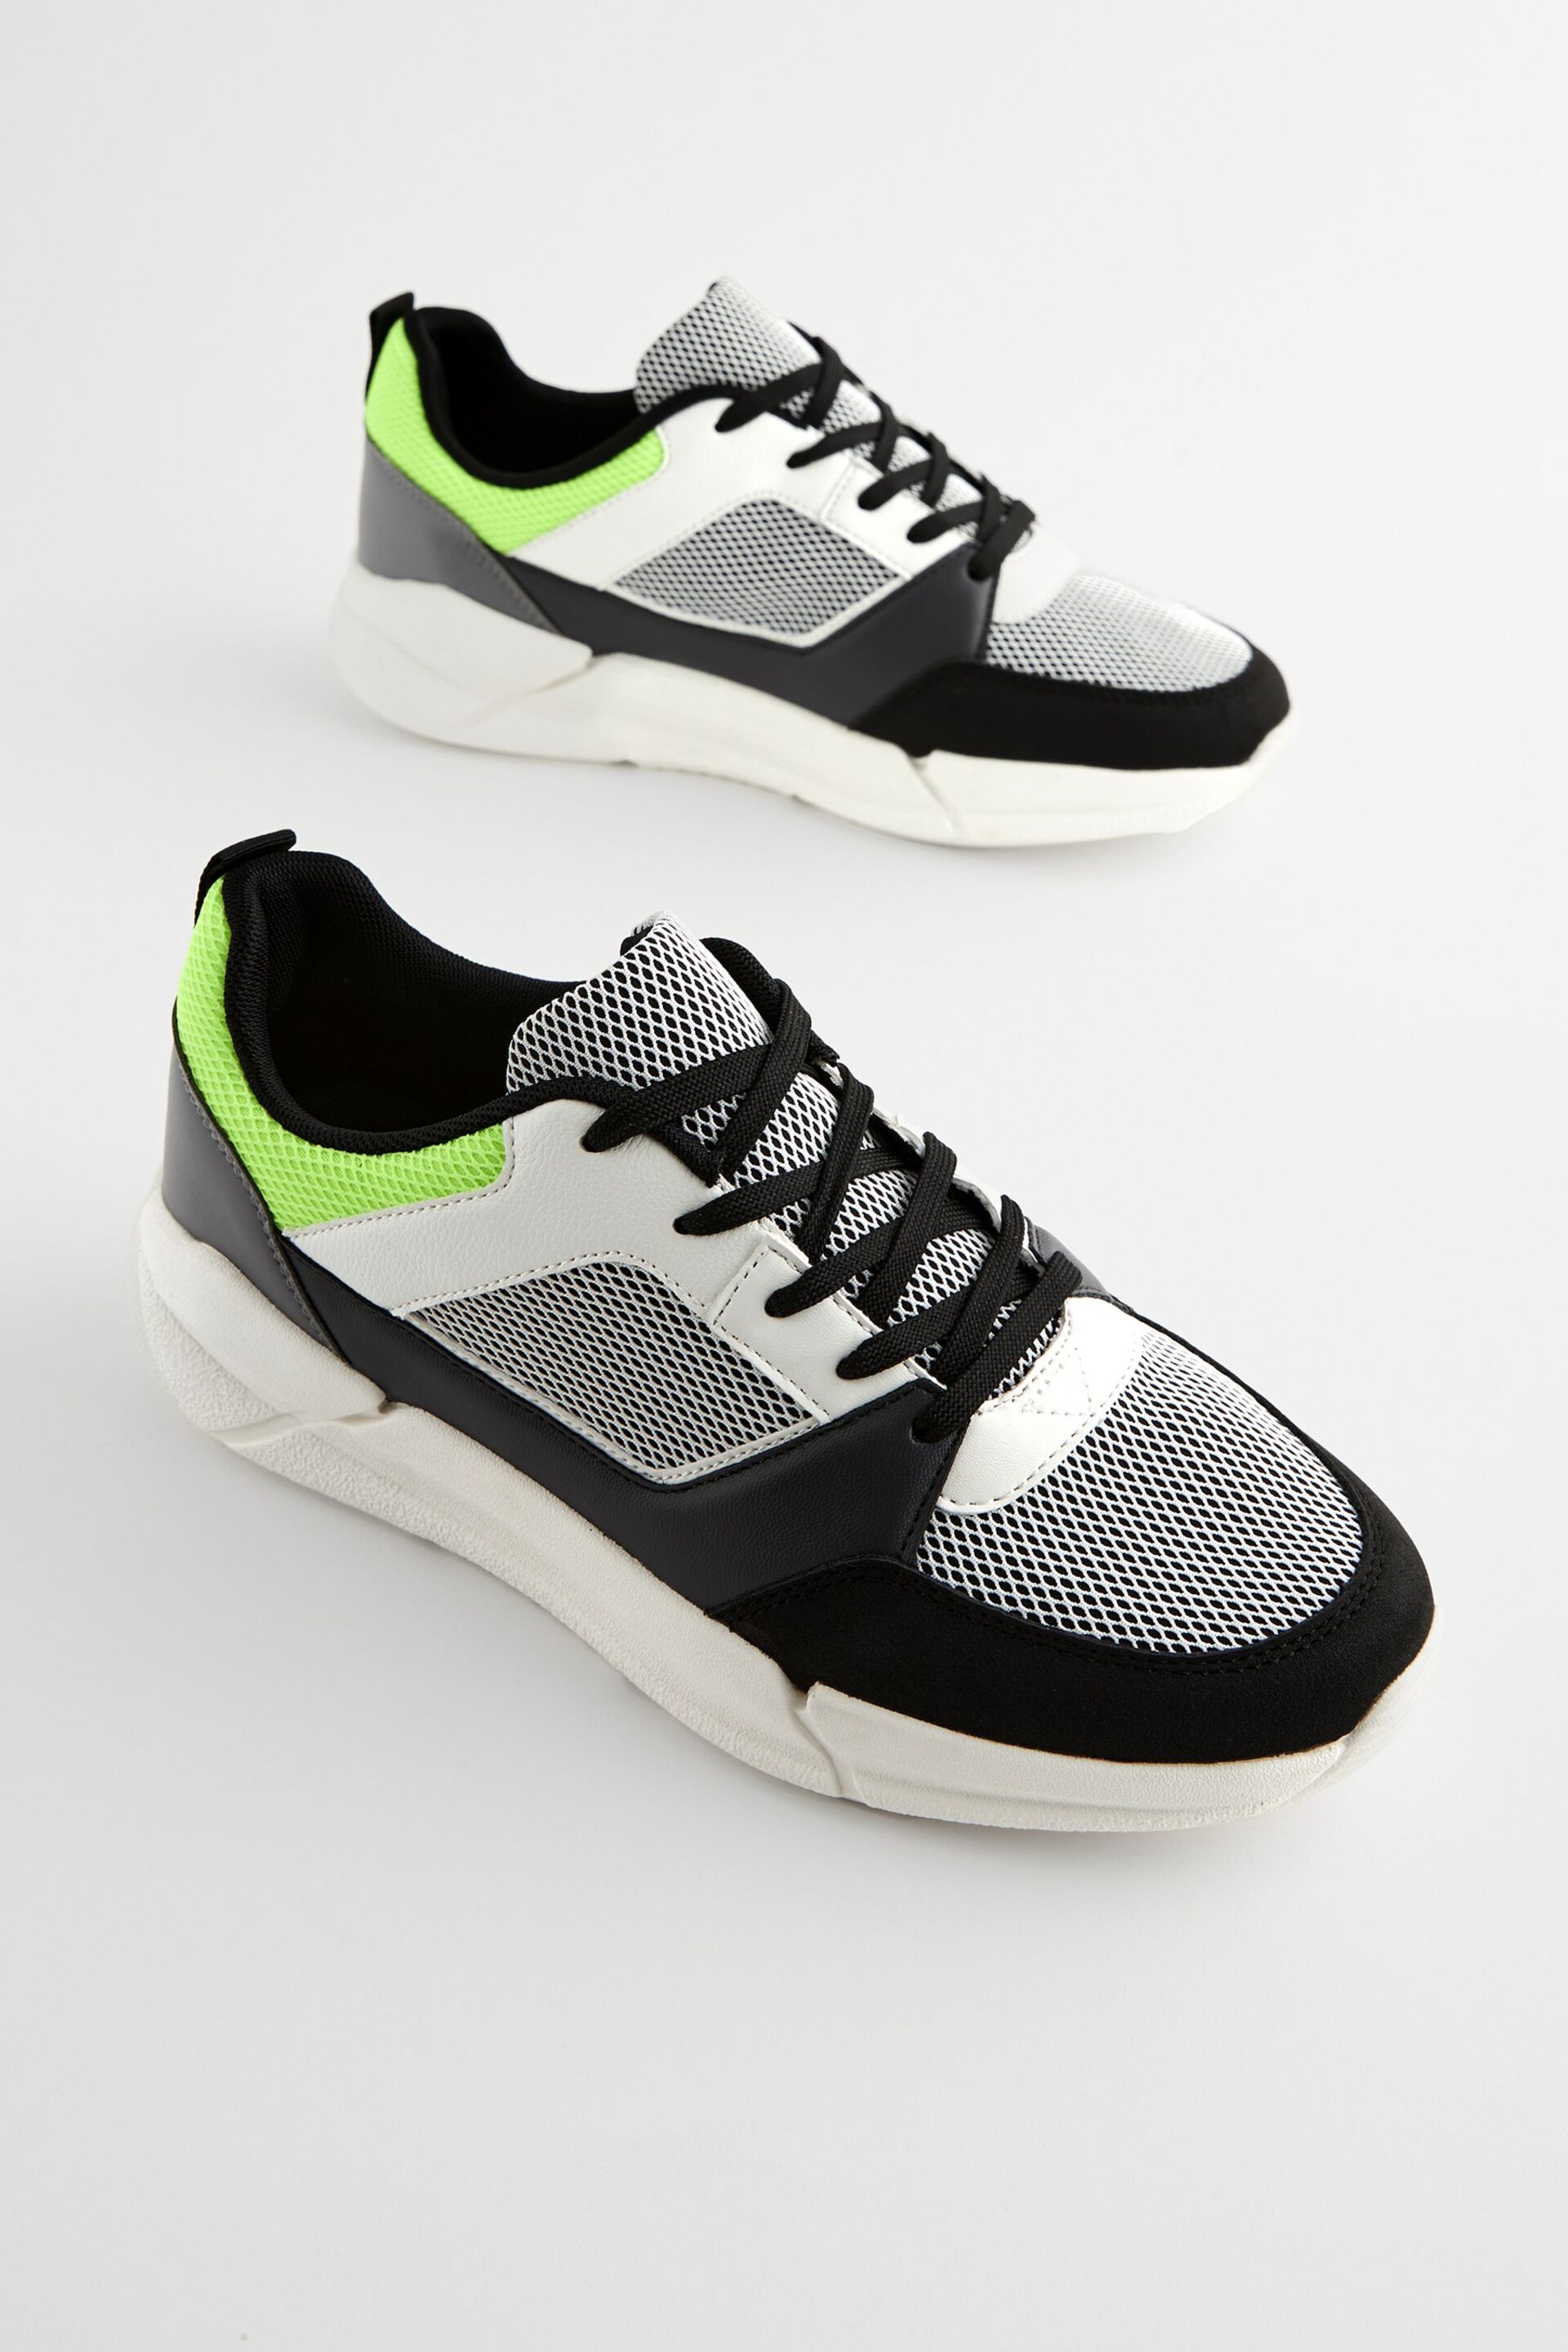 Black/White EDIT Mesh Trainers - Image 1 of 5